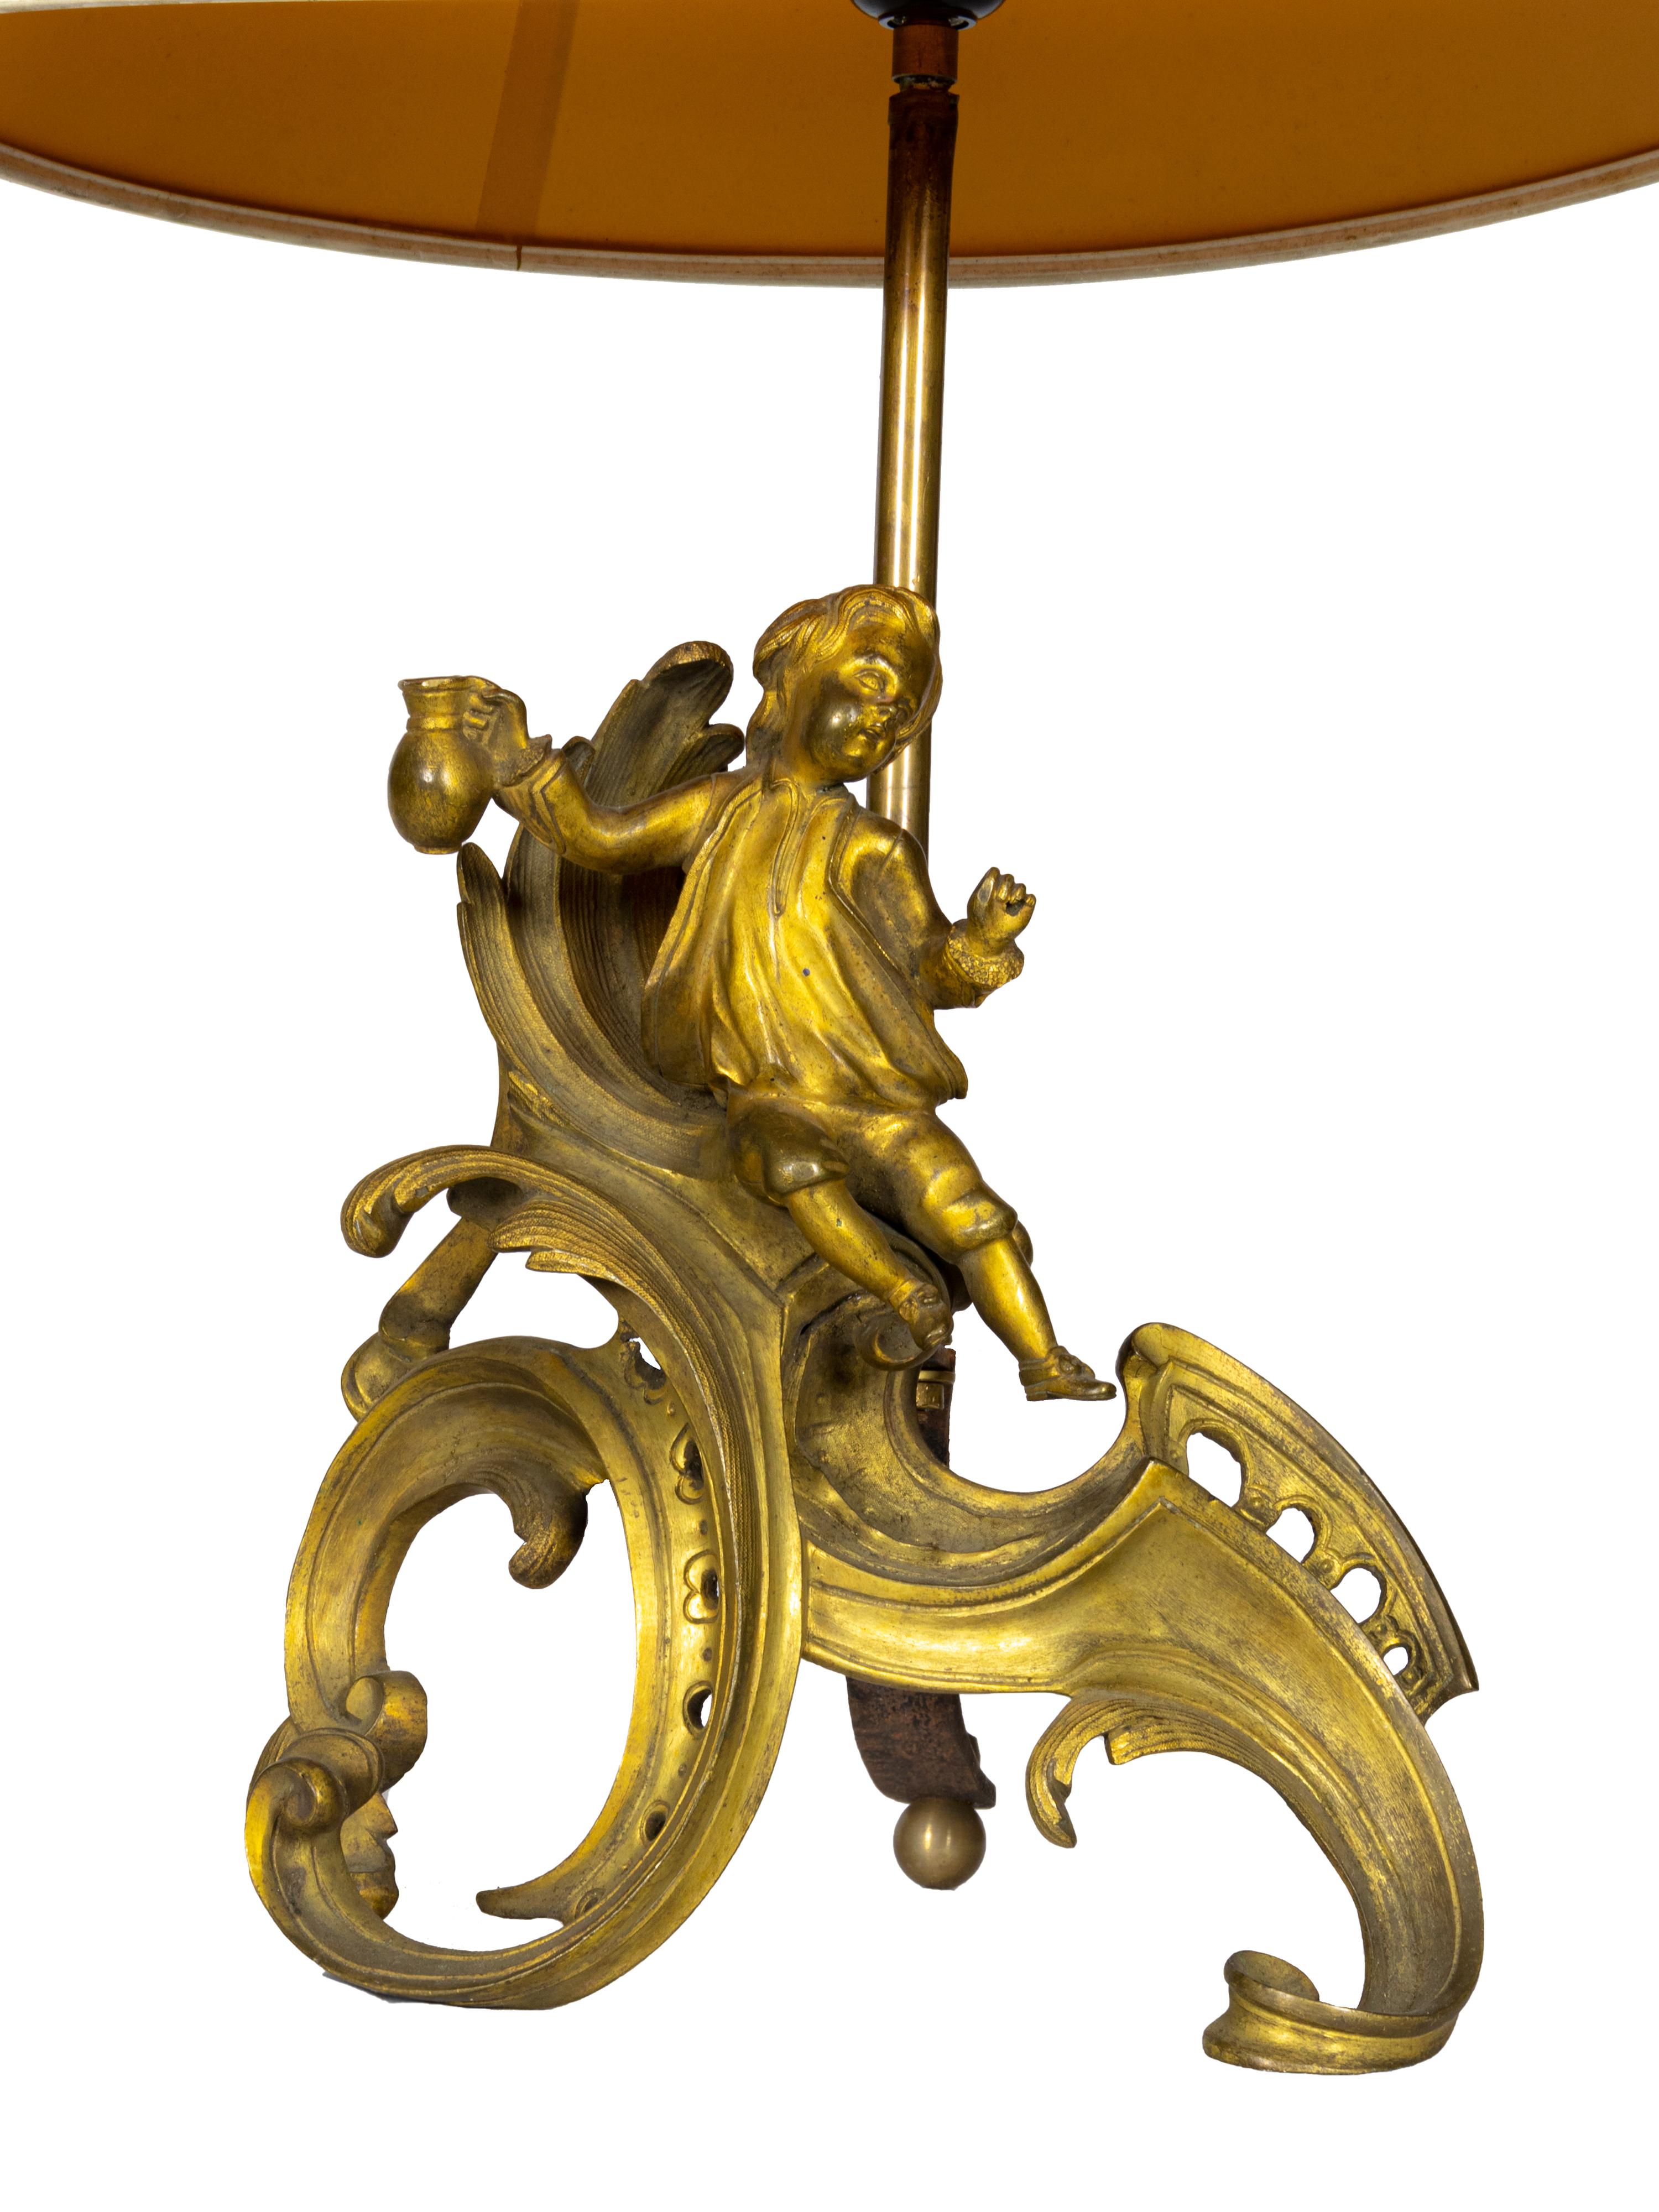 A high quality  gilt-bronze and copper Louis XV style chenet table lamp, with nicely-cast foliate detailing and featuring Louis XV style ormolu with Putti, France 19th century with patina.

Statue Heigh: 26,5 cm
Height to lamp holder: 43 cm

